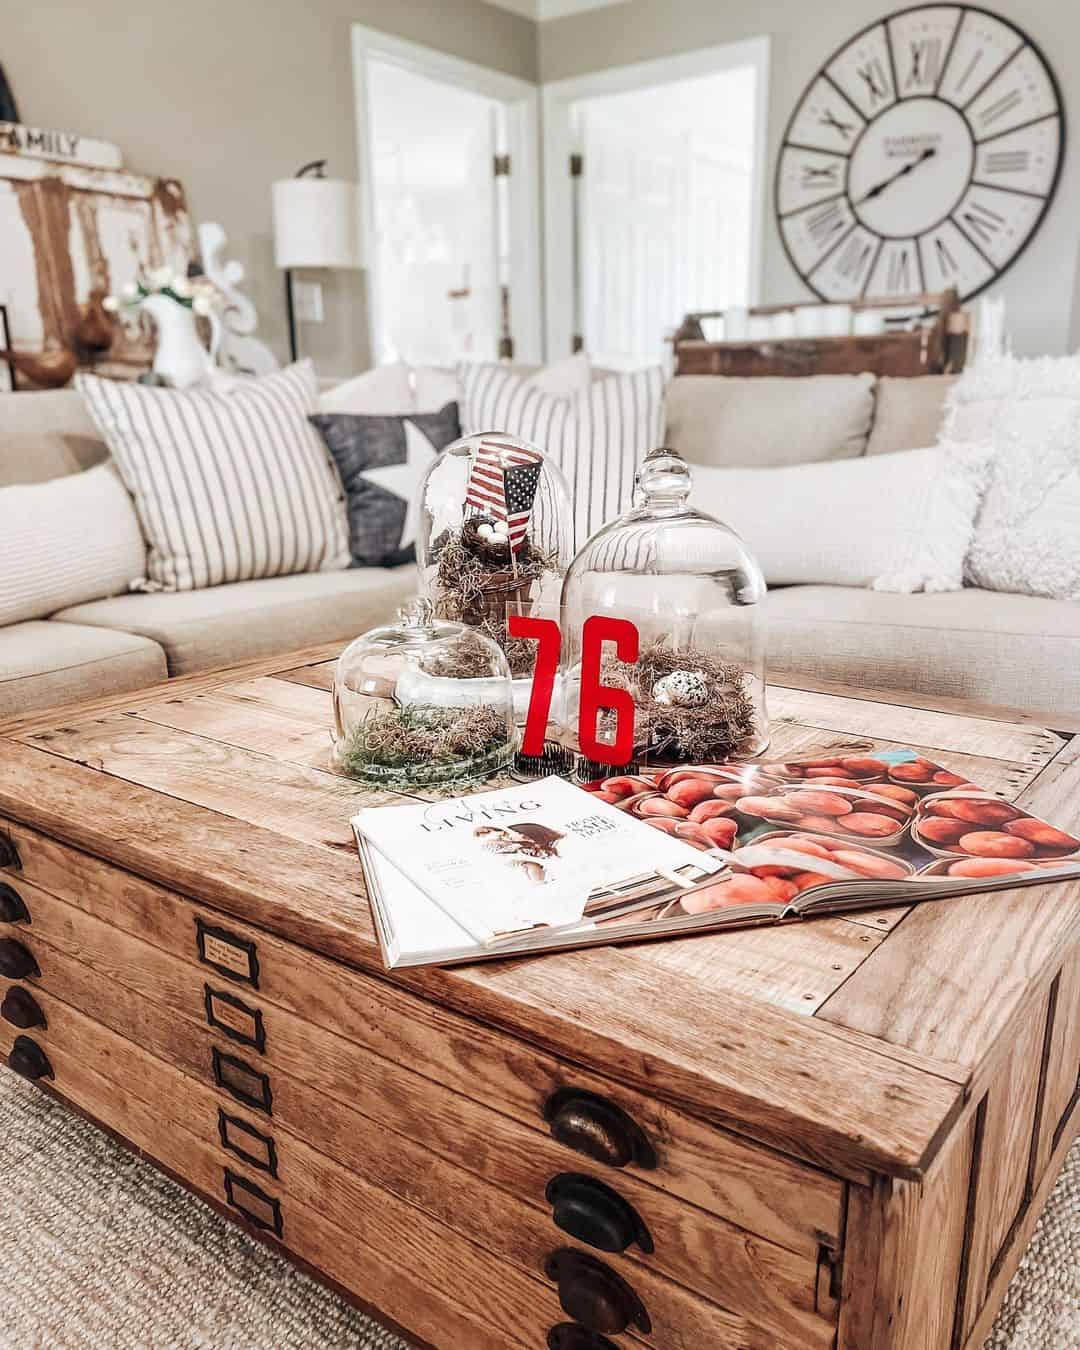 Rustic Wood Apothecary Coffee Table with Glass Cloches